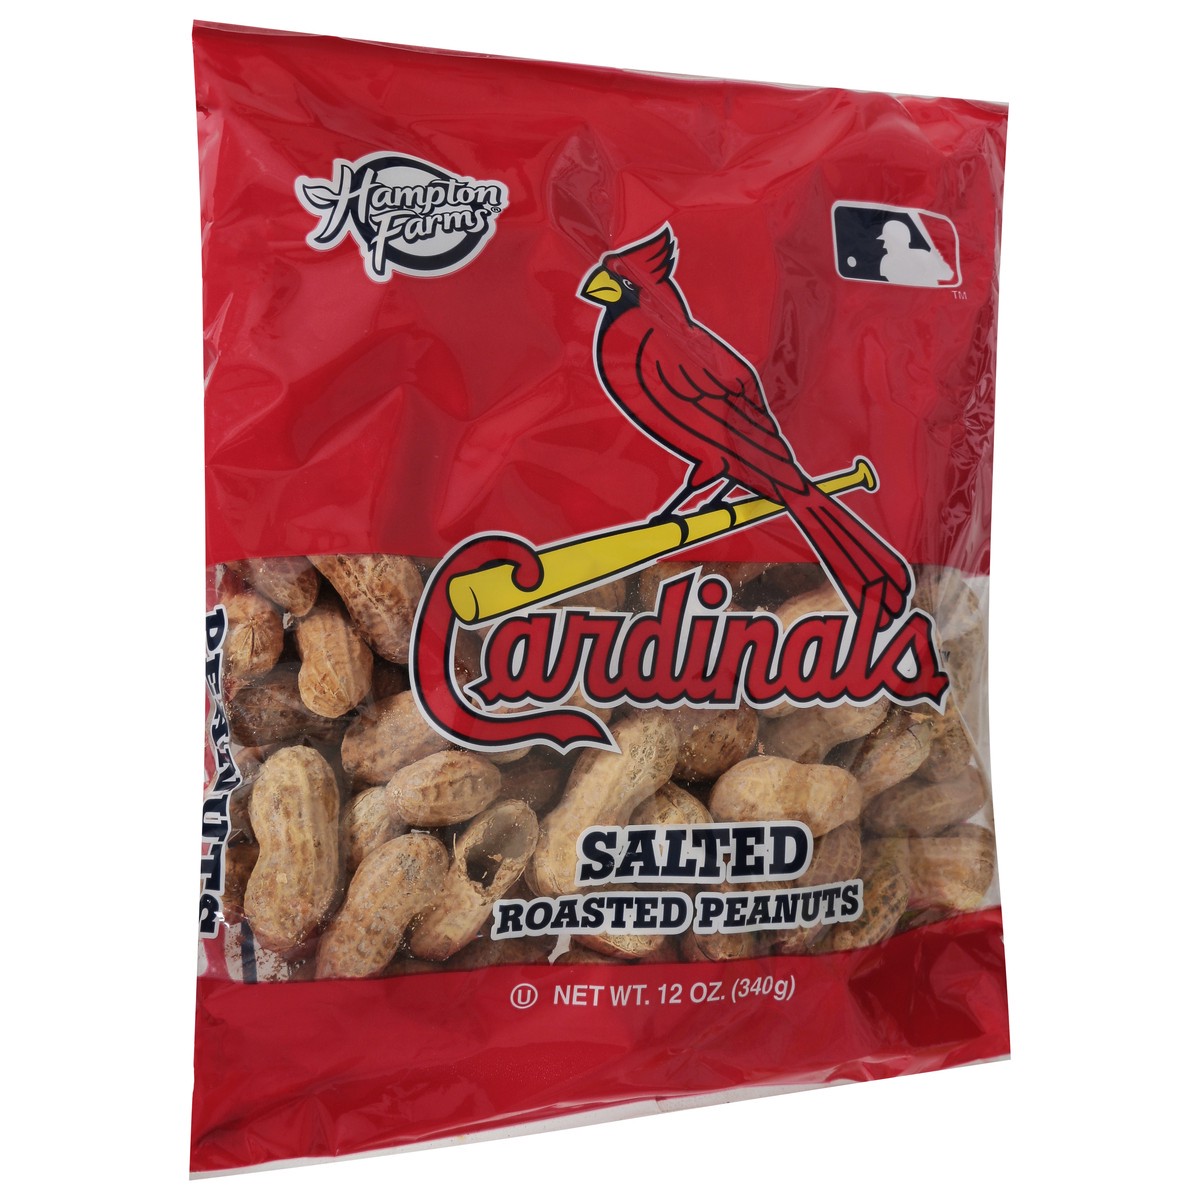 slide 10 of 13, Hampton Farms St Louis Cardinals Salted in Shell Roasted Peanuts, 12 oz